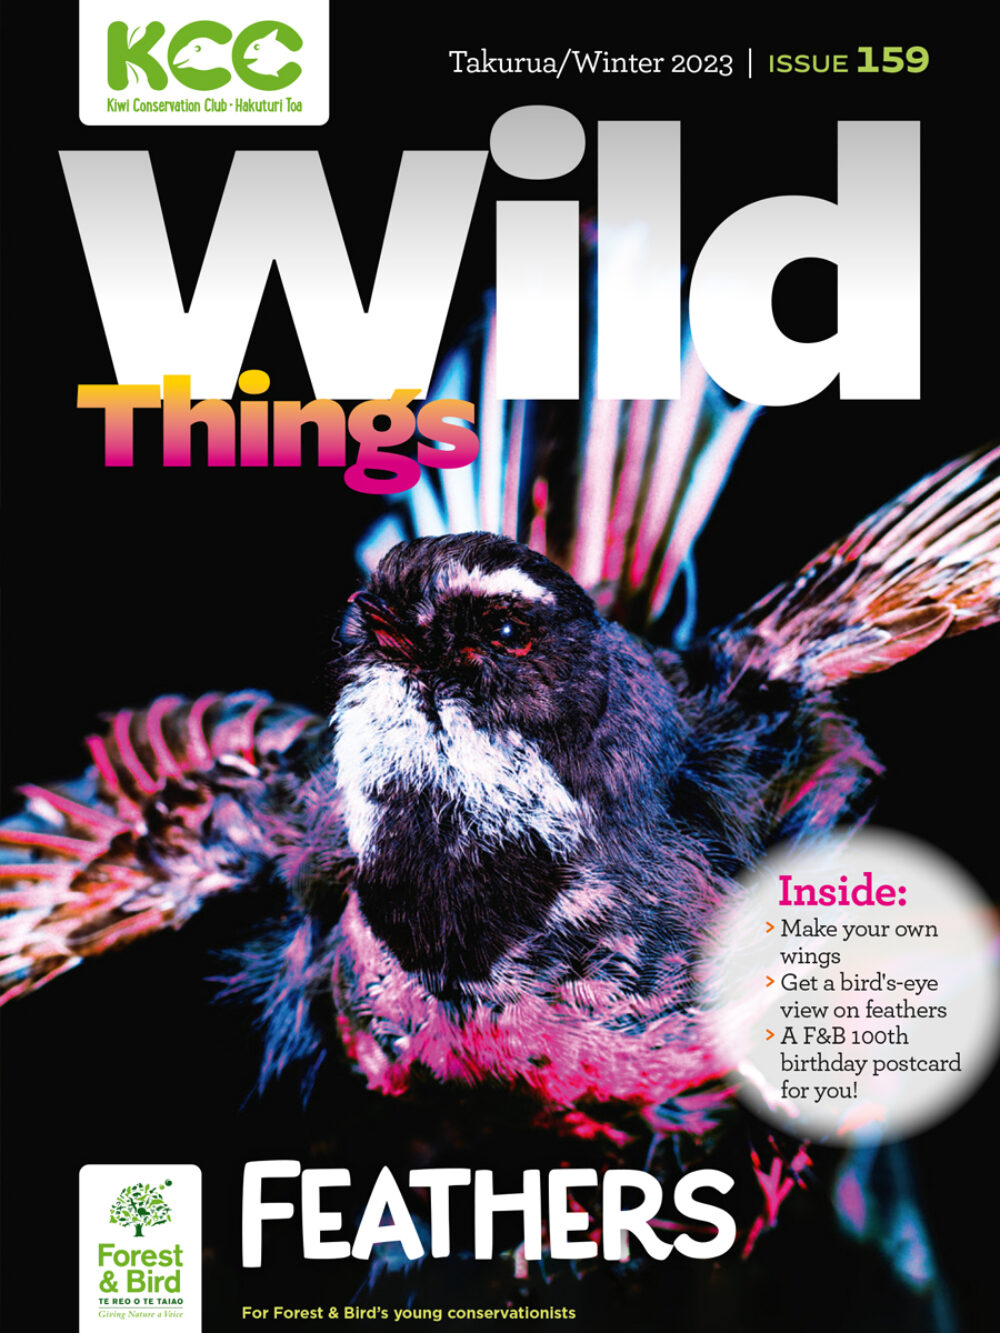 KCC_WildThings_159_Winter_2023_cover (1)